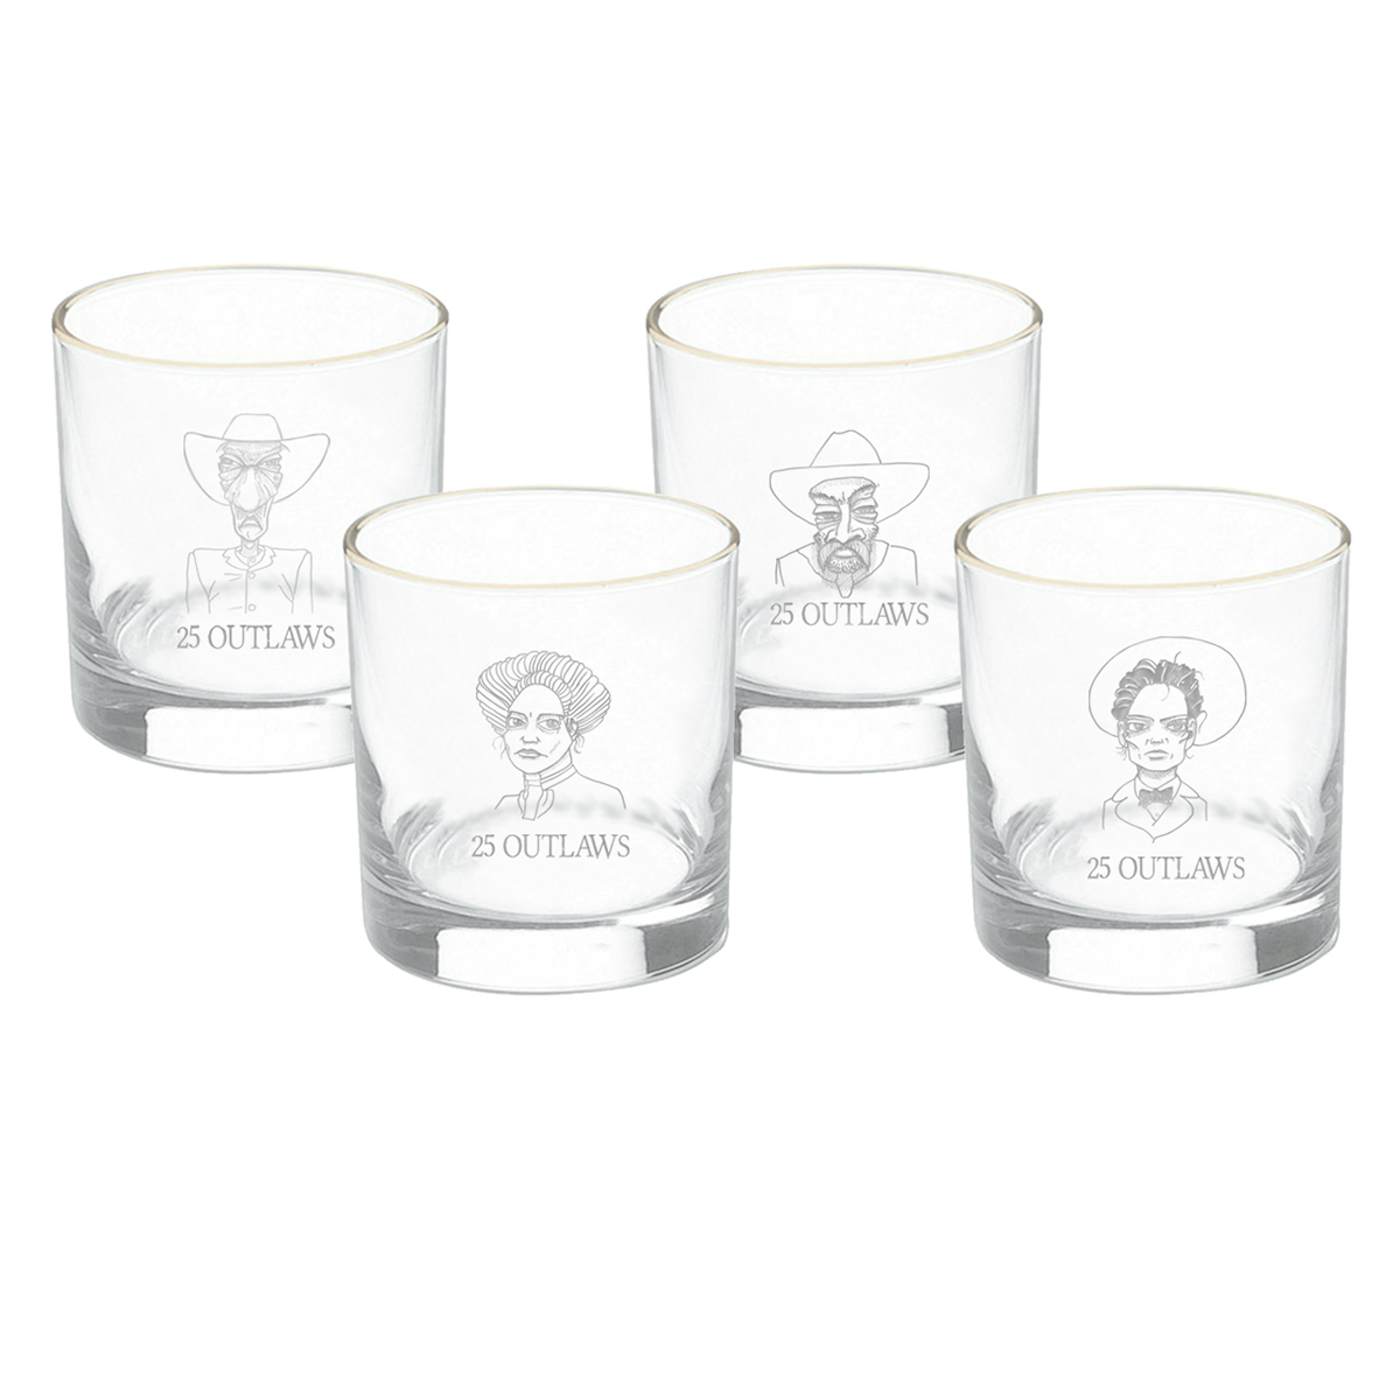 25 Outlaws Whiskey Glass Set